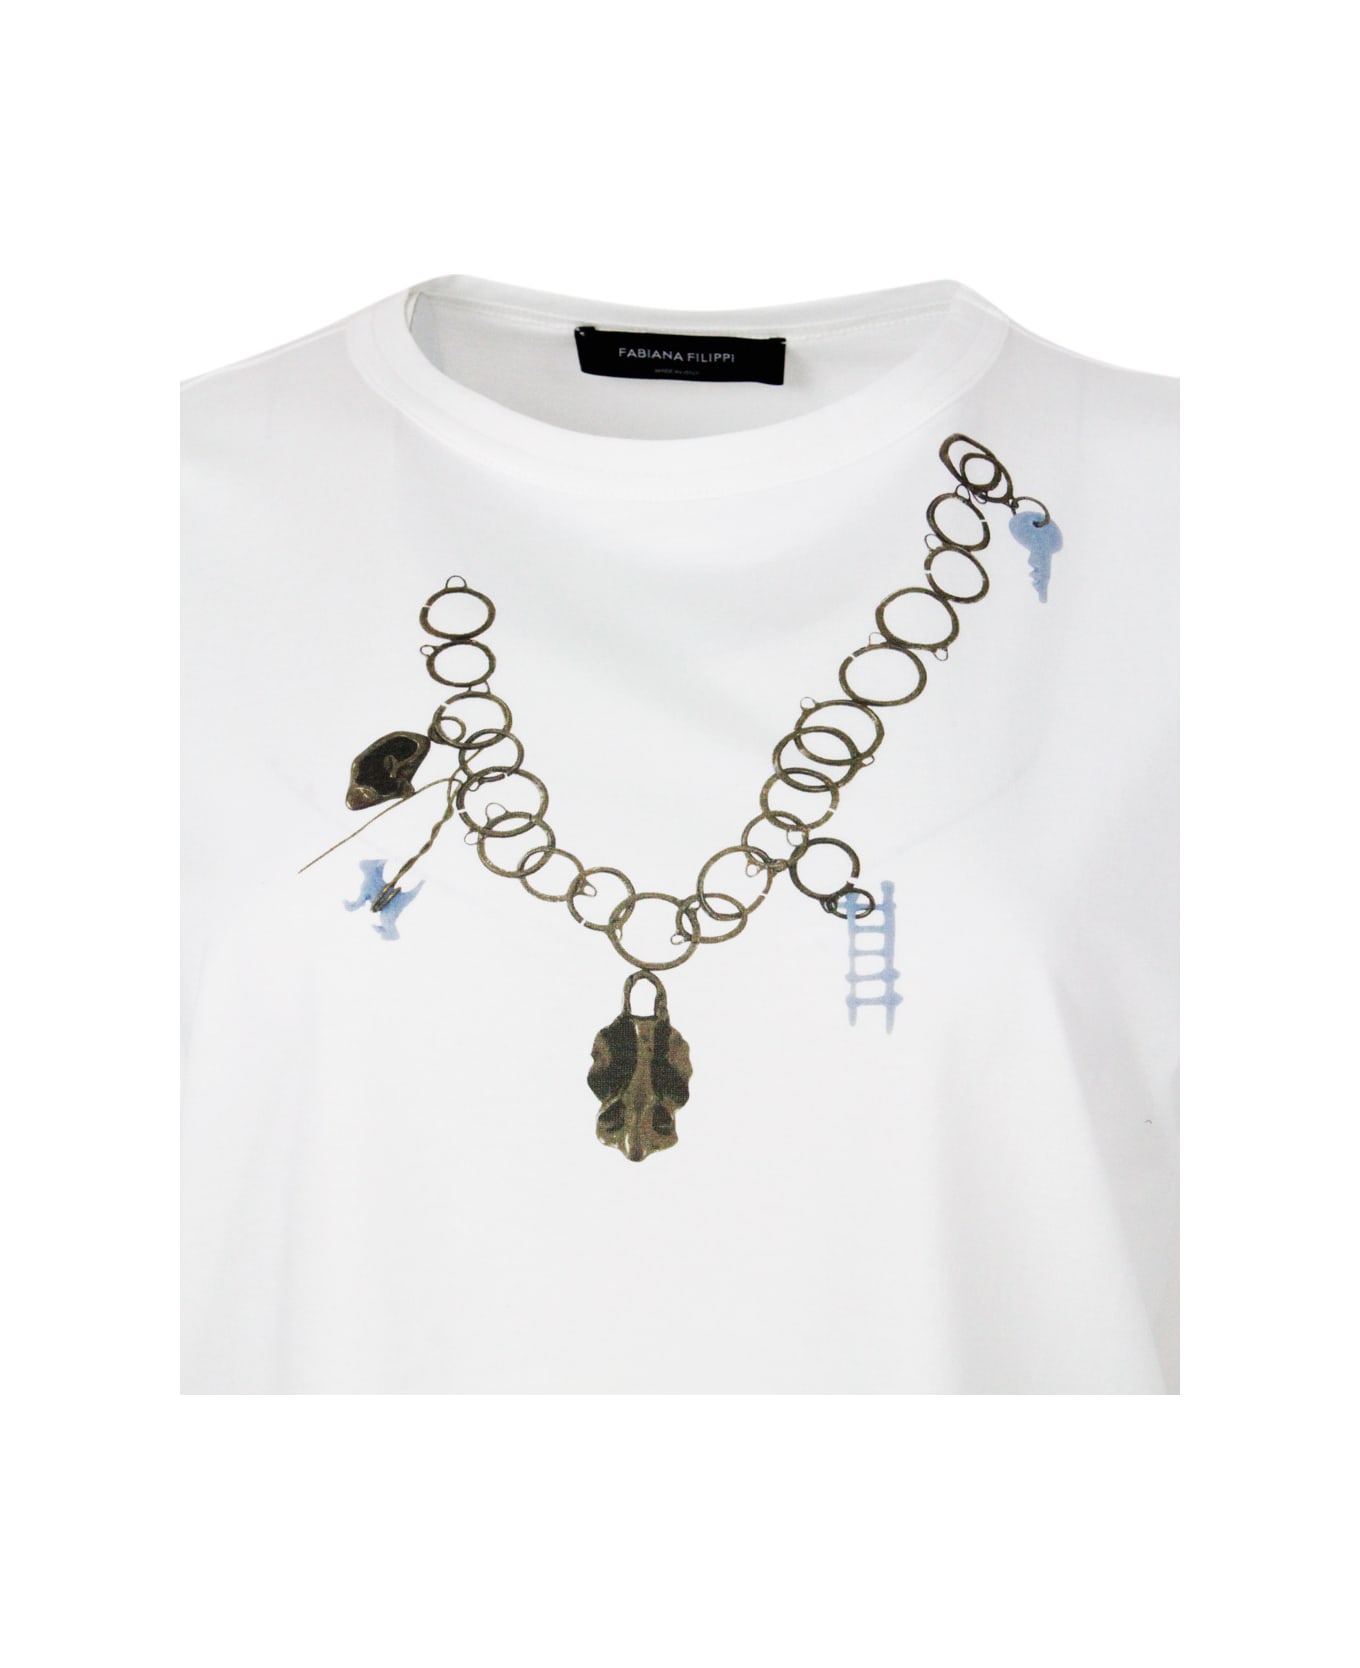 Fabiana Filippi Short-sleeved Crew-neck T-shirt In Fine Cotton Jersey With Chain Print - White